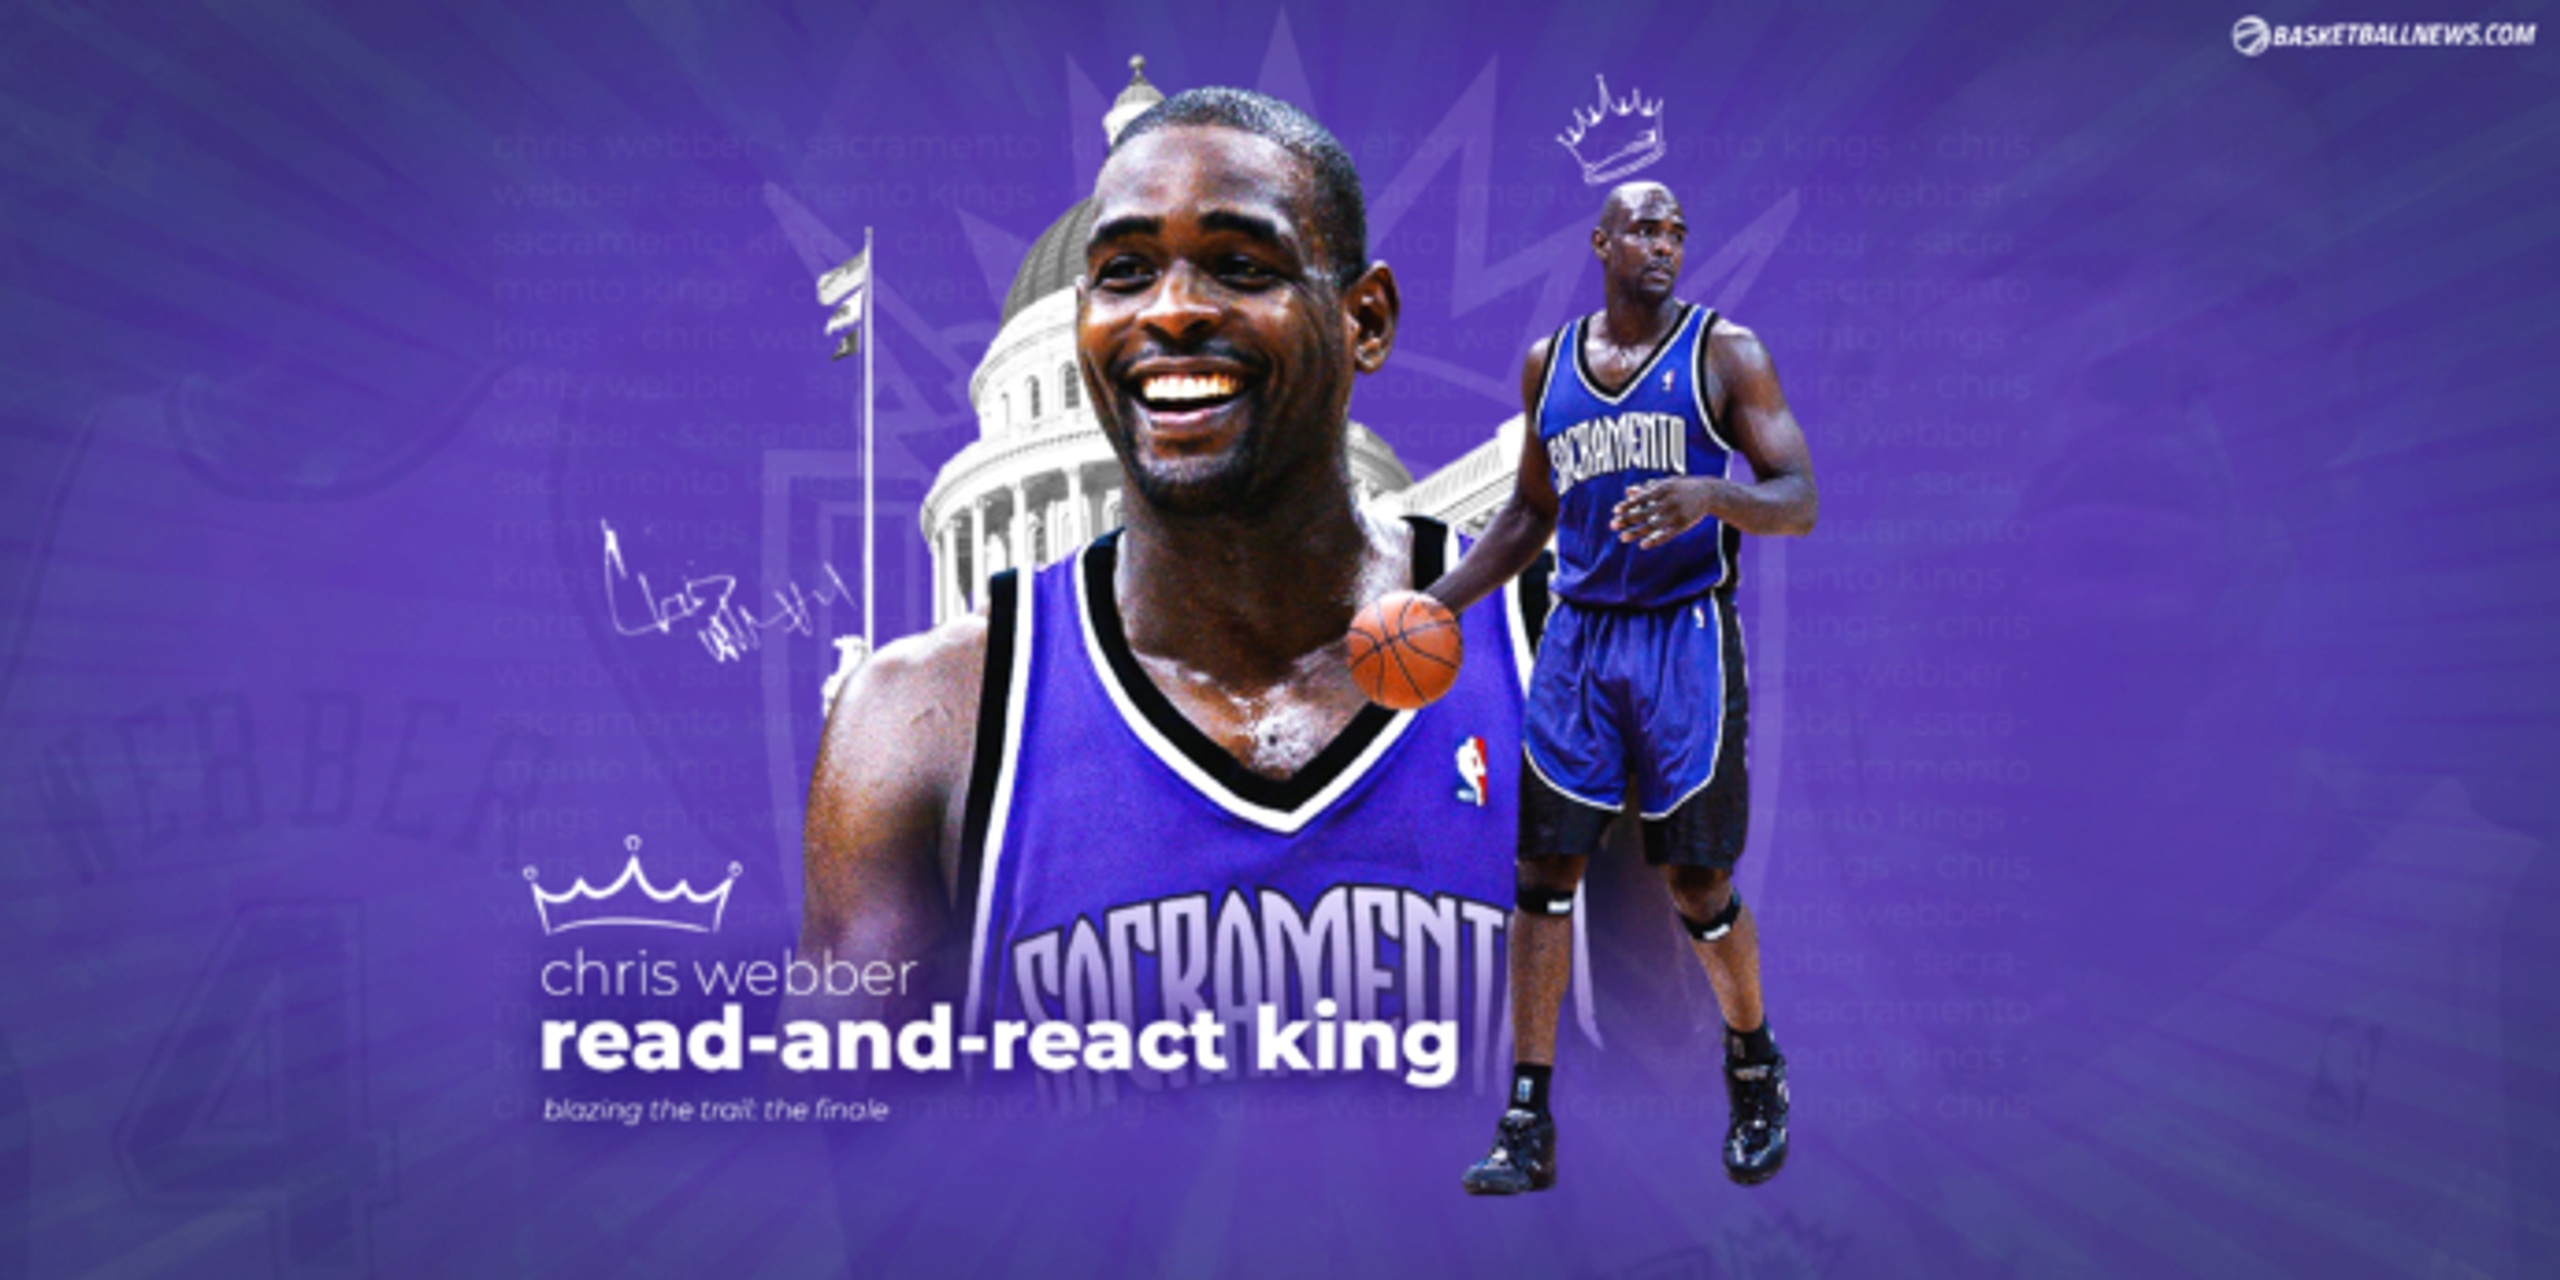 Blazing the Trail: Chris Webber, the read-and-react king